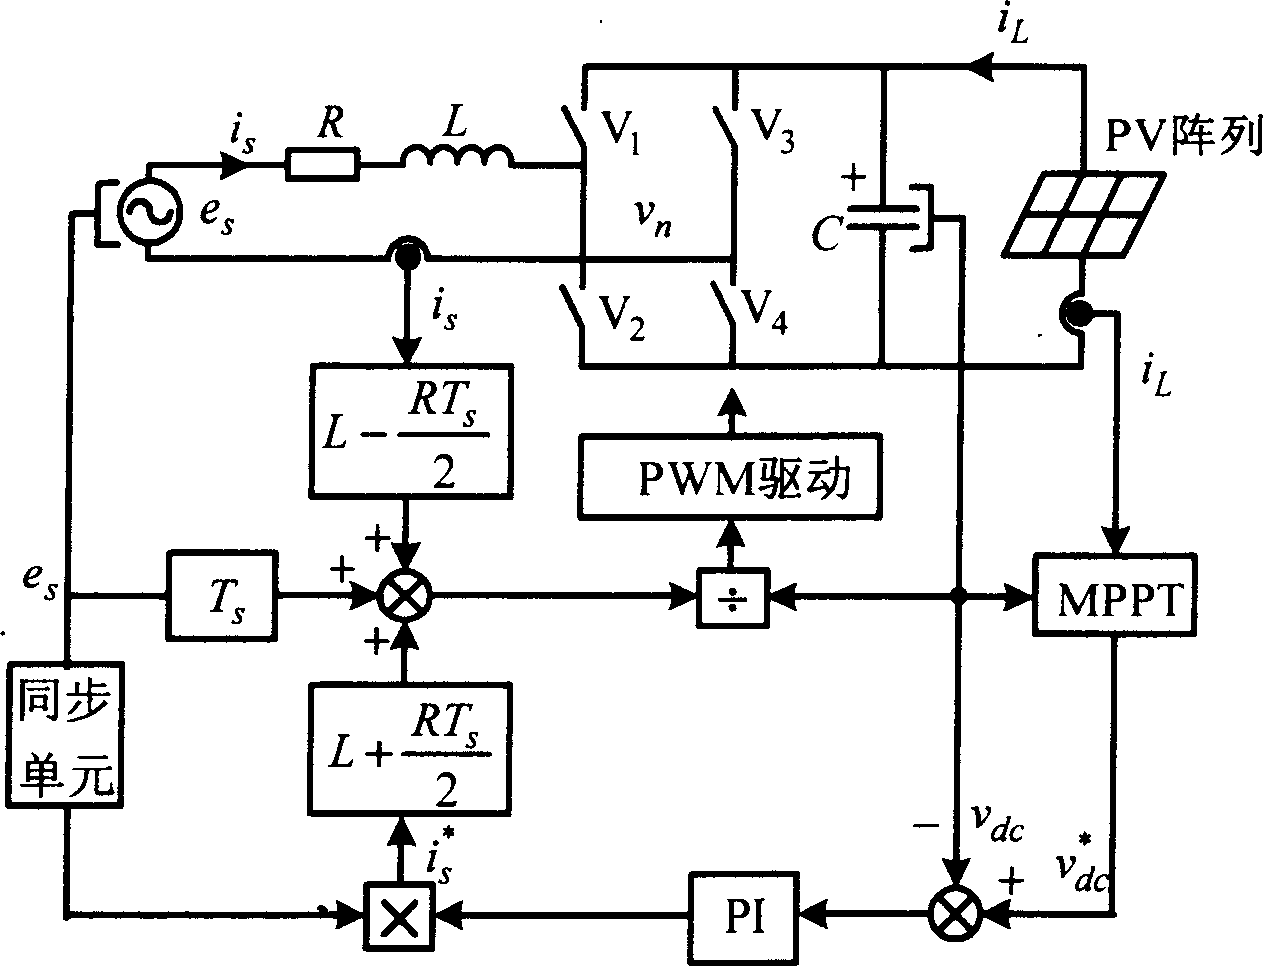 A method of photovoltaic grid-connected inversion